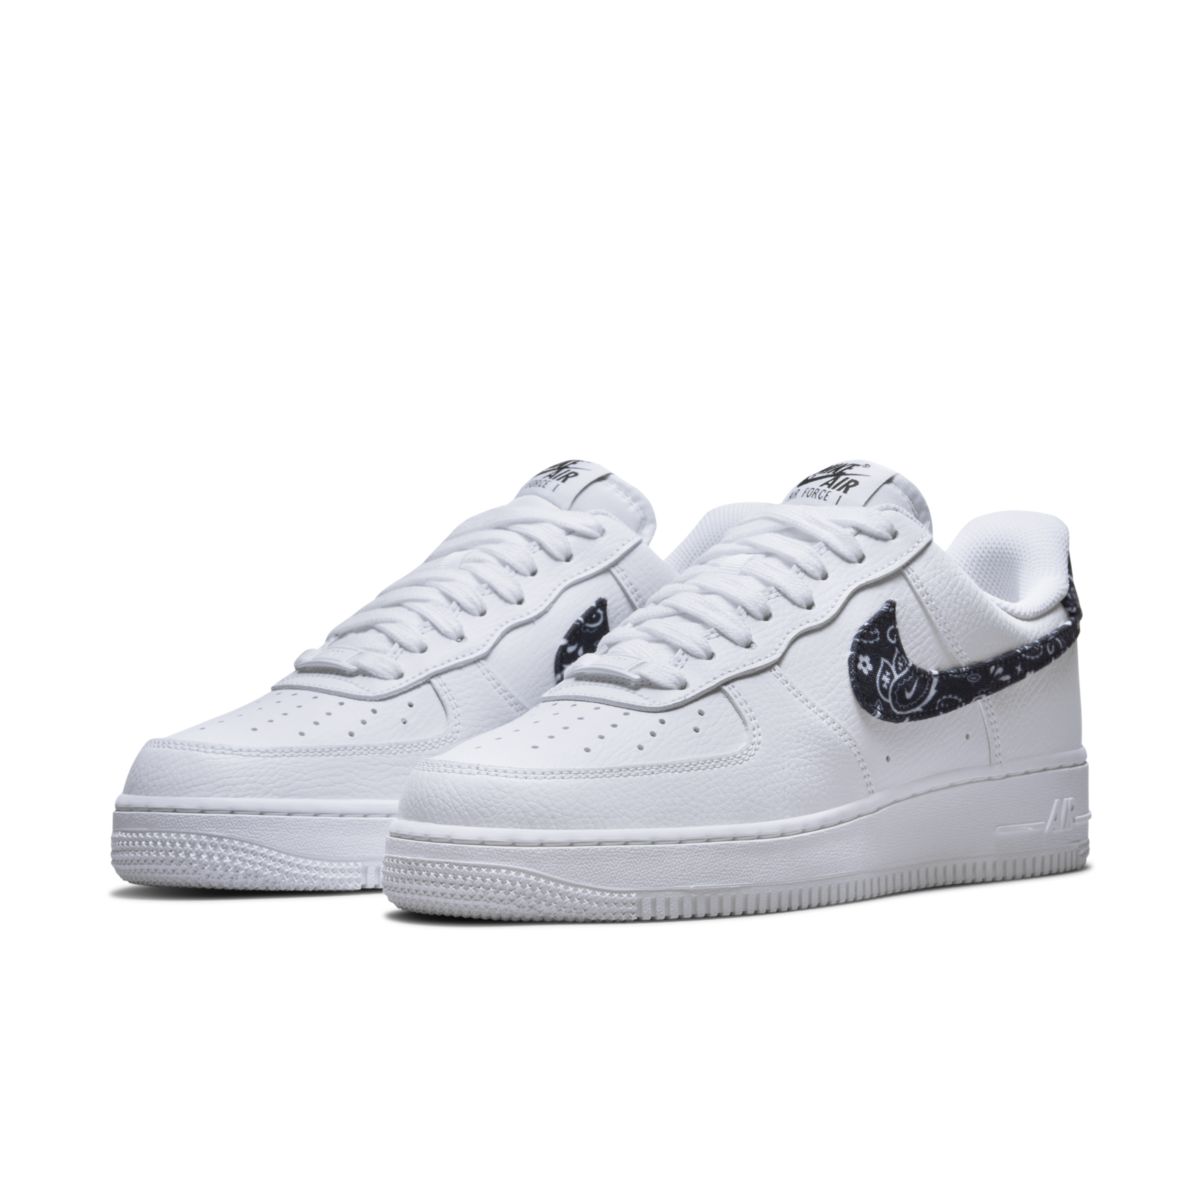 Nike Air Force 1 low black paisley DH4406-101 4